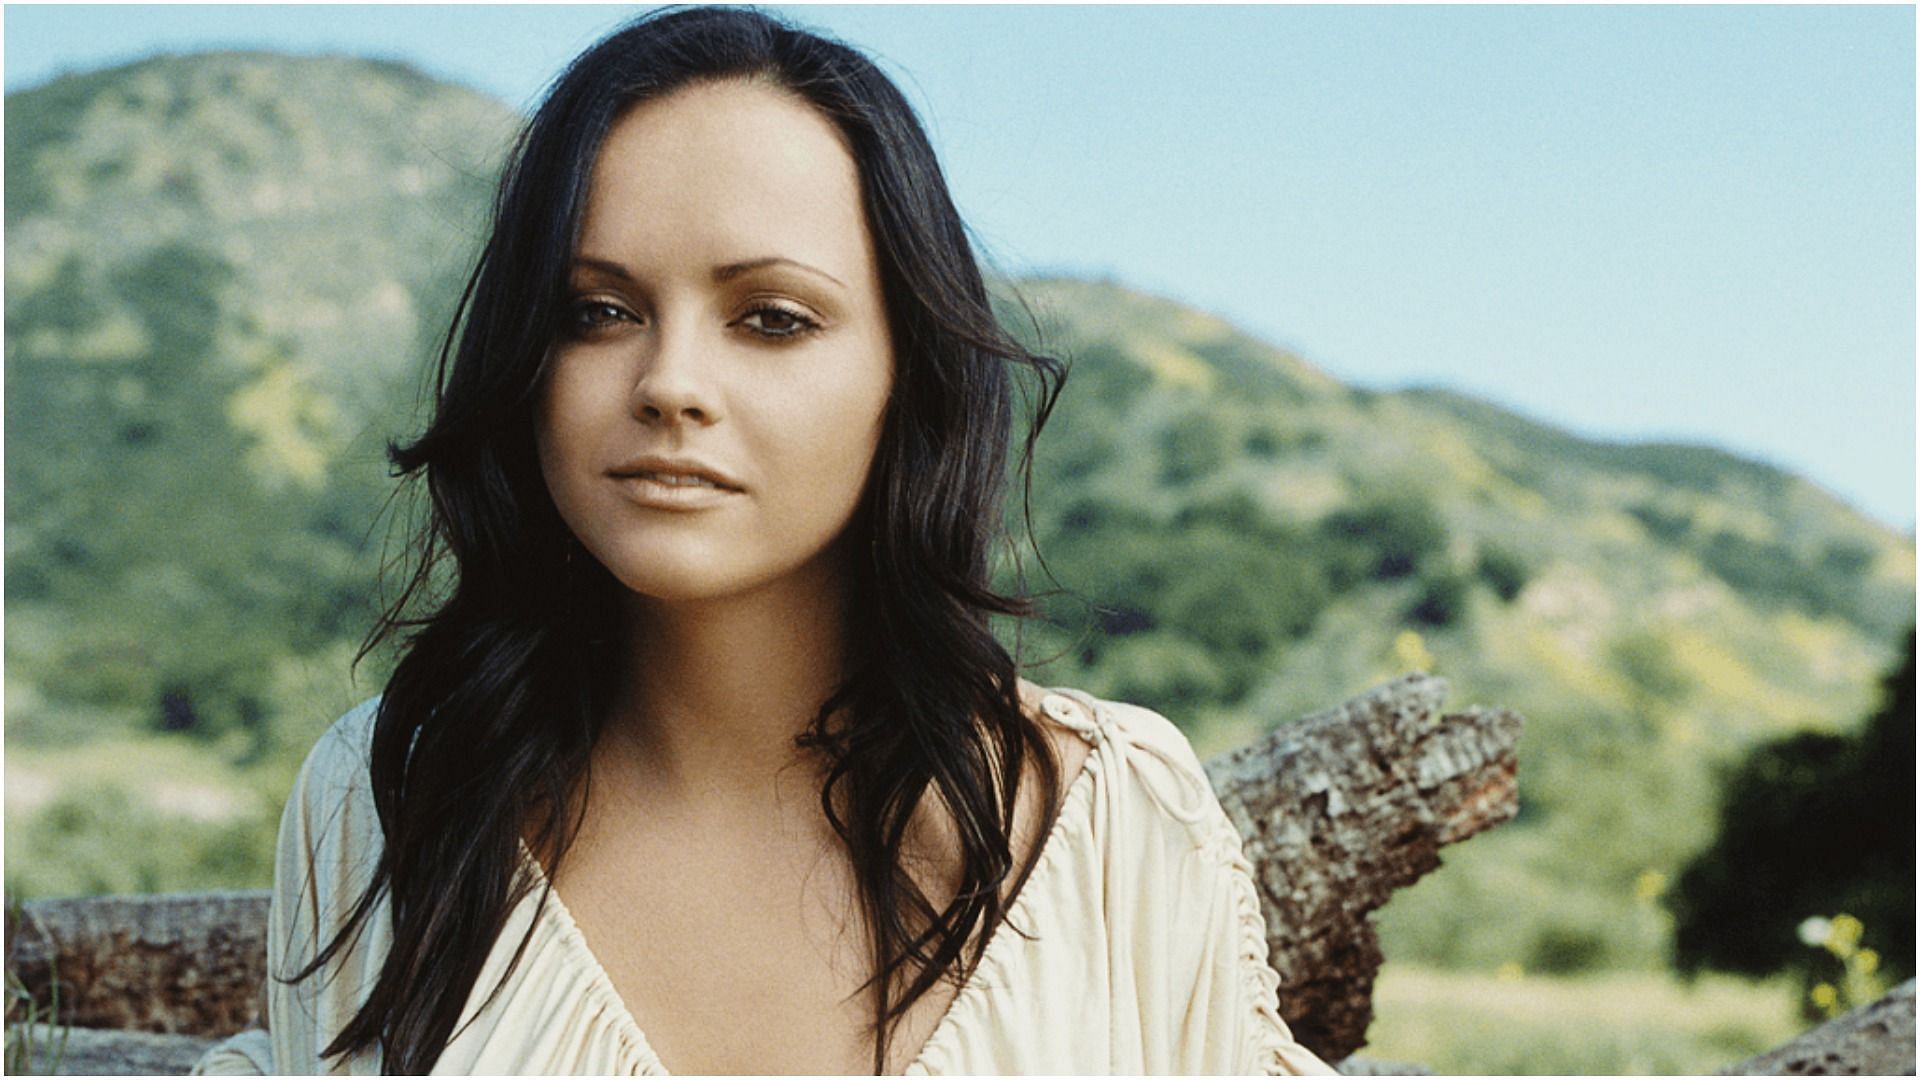 Christina Ricci has appeared in several commercially successful films (Image via wallpapercave.com)